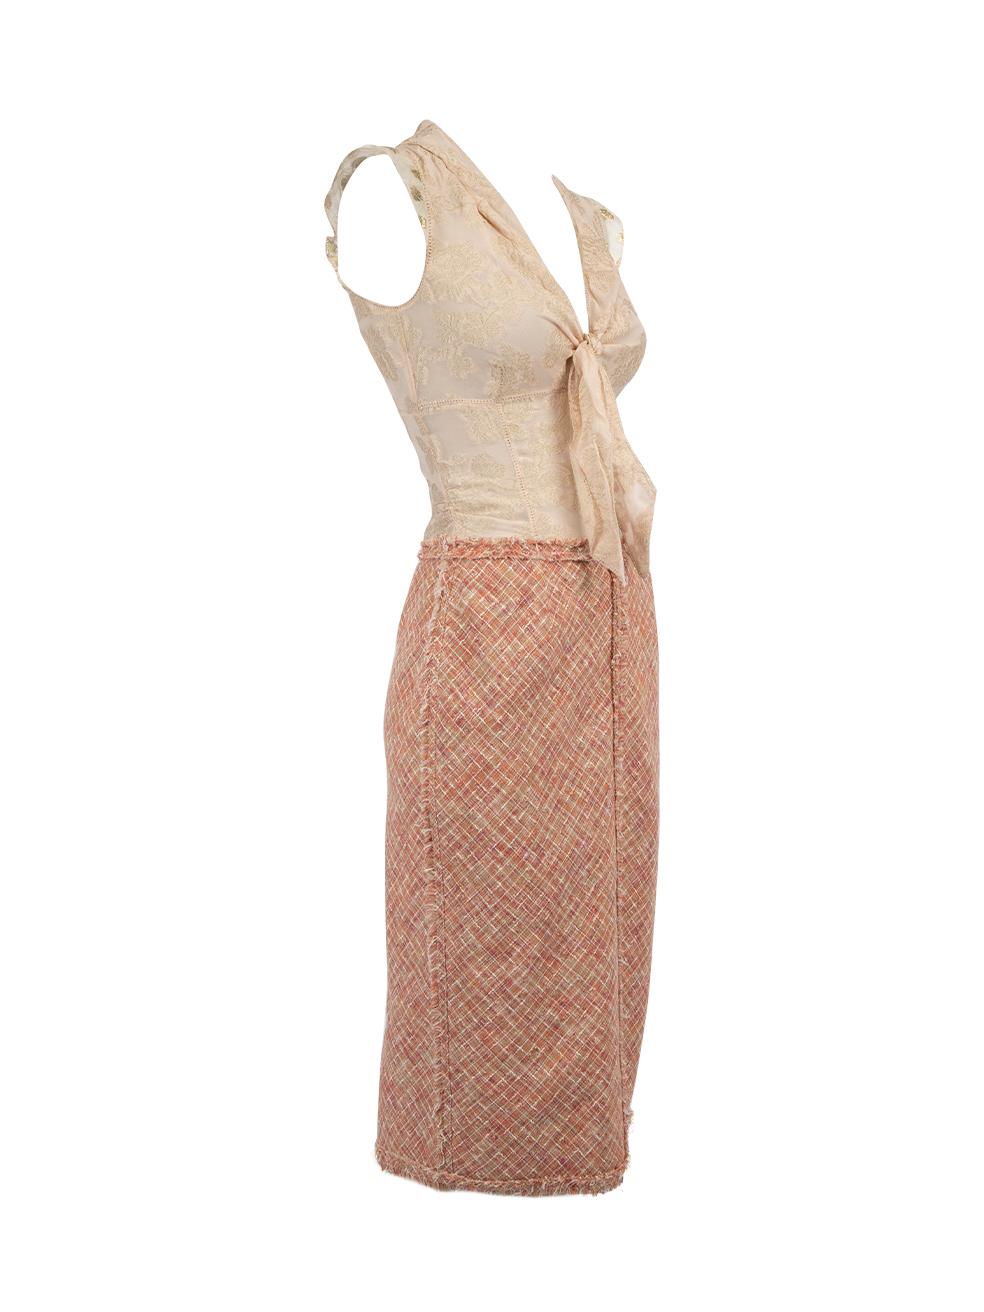 CONDITION is Very good. Minimal wear to dress is evident. Minimal loose threads on the skirt can be seen on this used Louis Vuitton designer resale item. Details Pink Silk and tweed Dress Midi length Sleeveless Floral patterned top Tie front Side